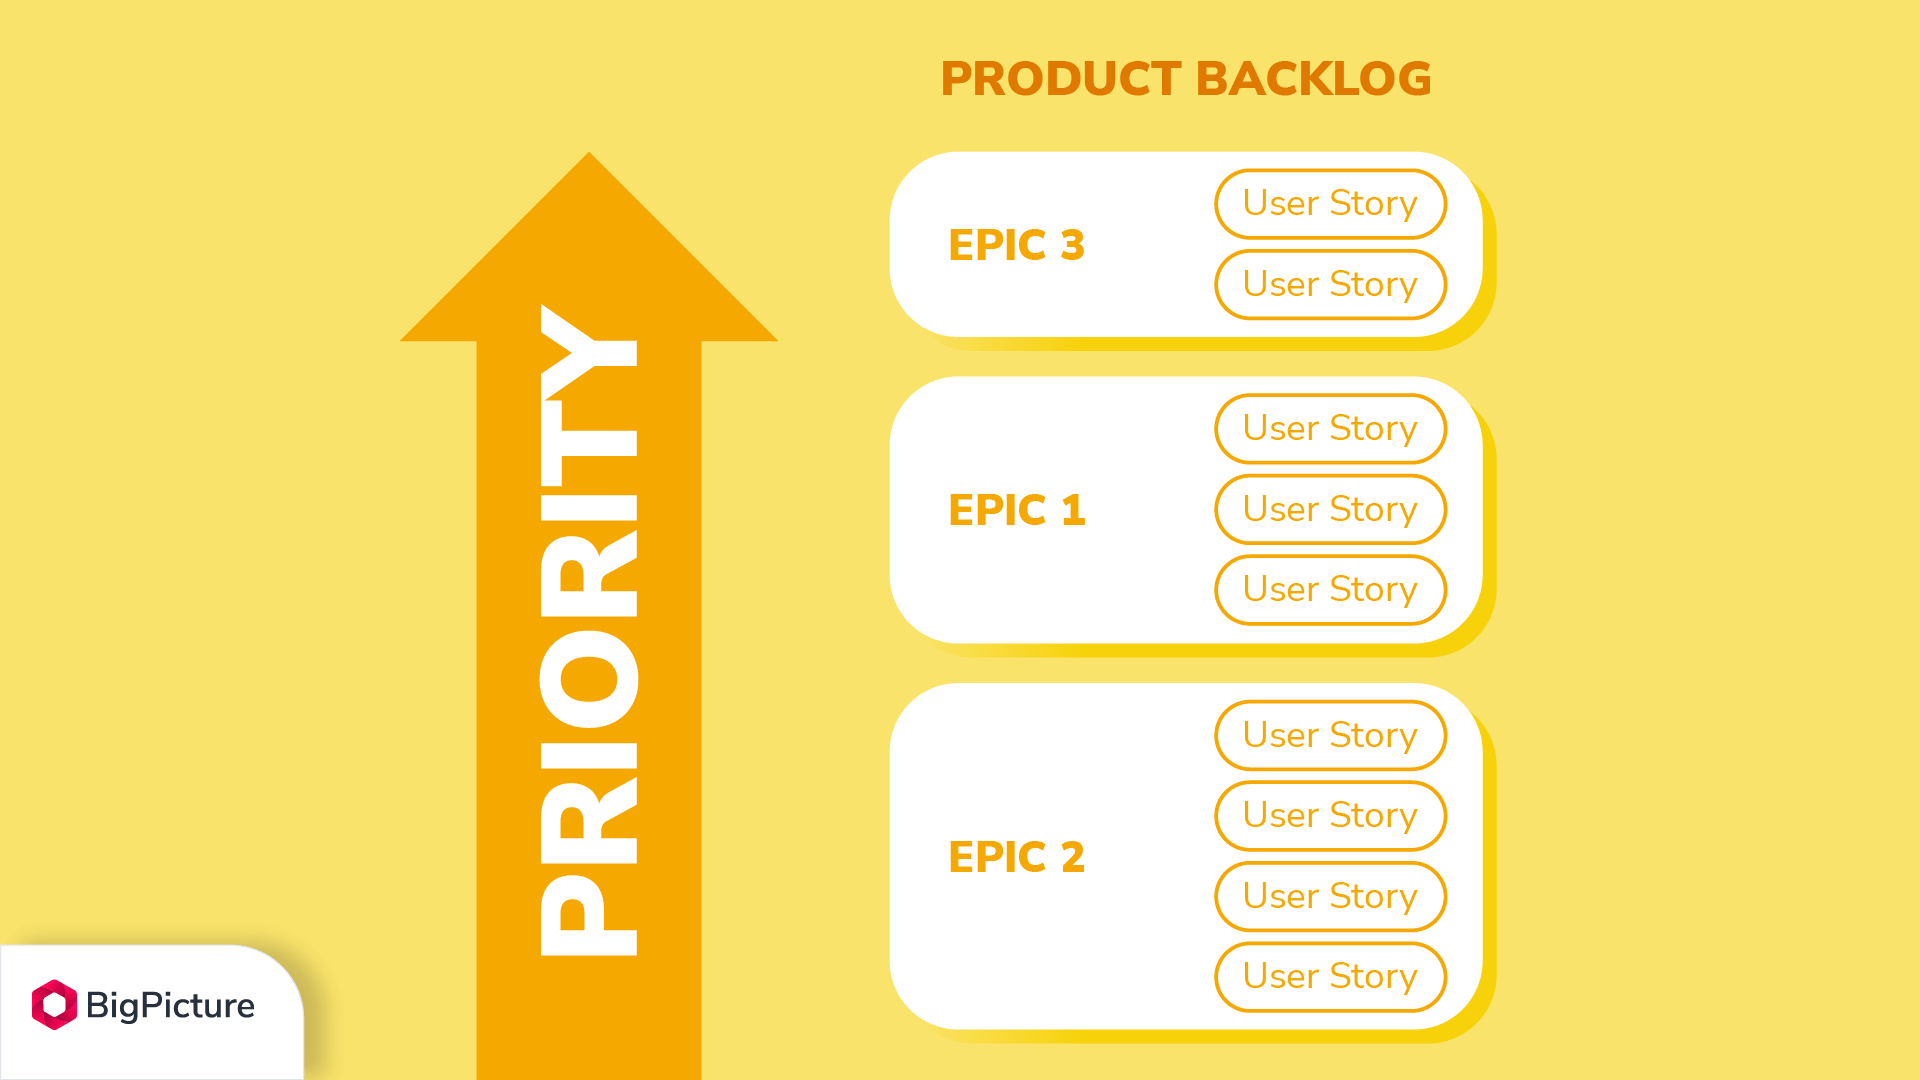 A product backlog contains a prioritized list of user stories